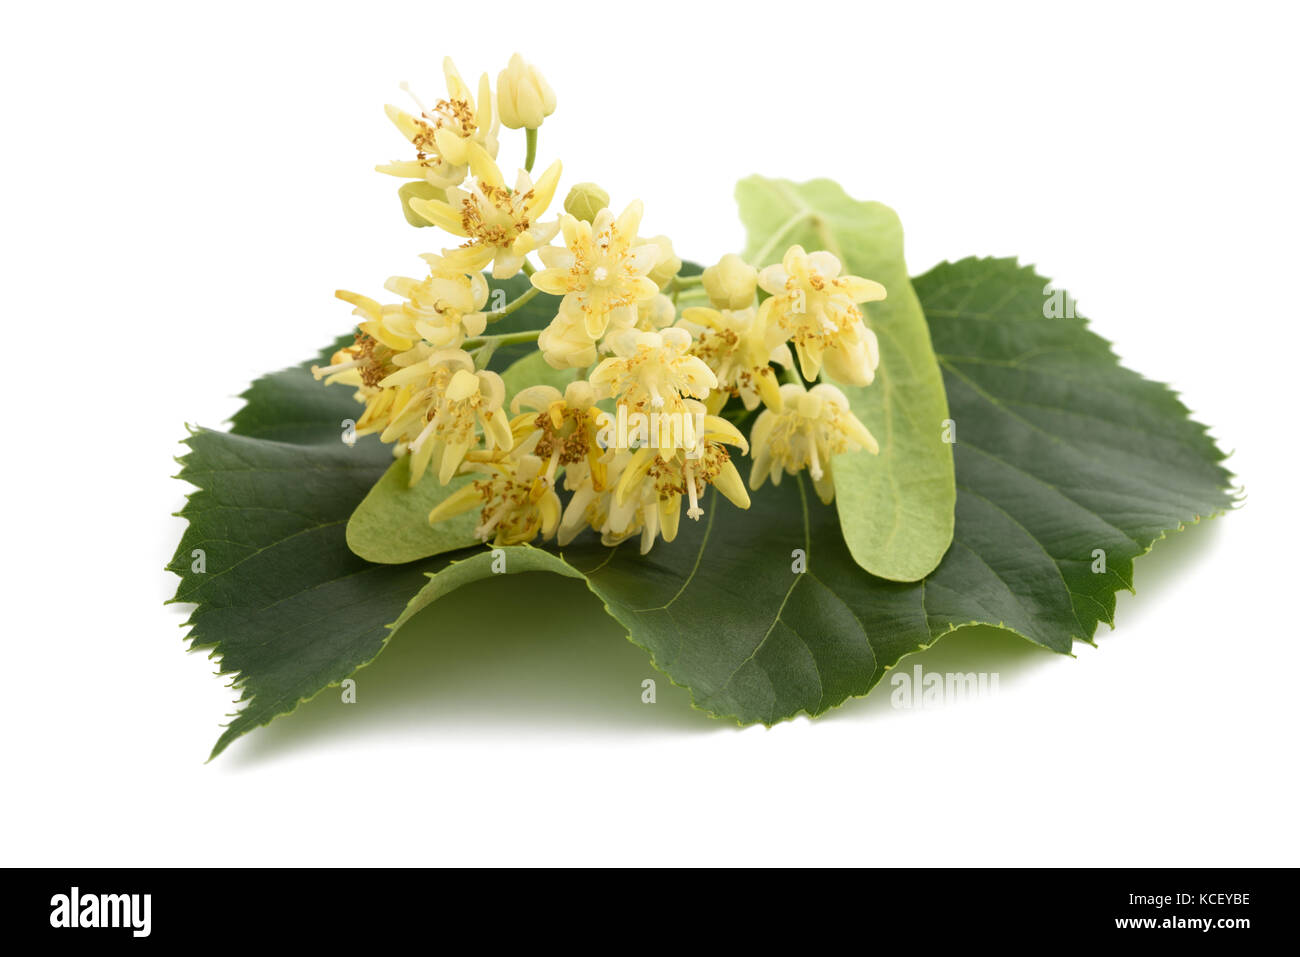 linden leaf with bract and flowers isolated on white background Stock Photo